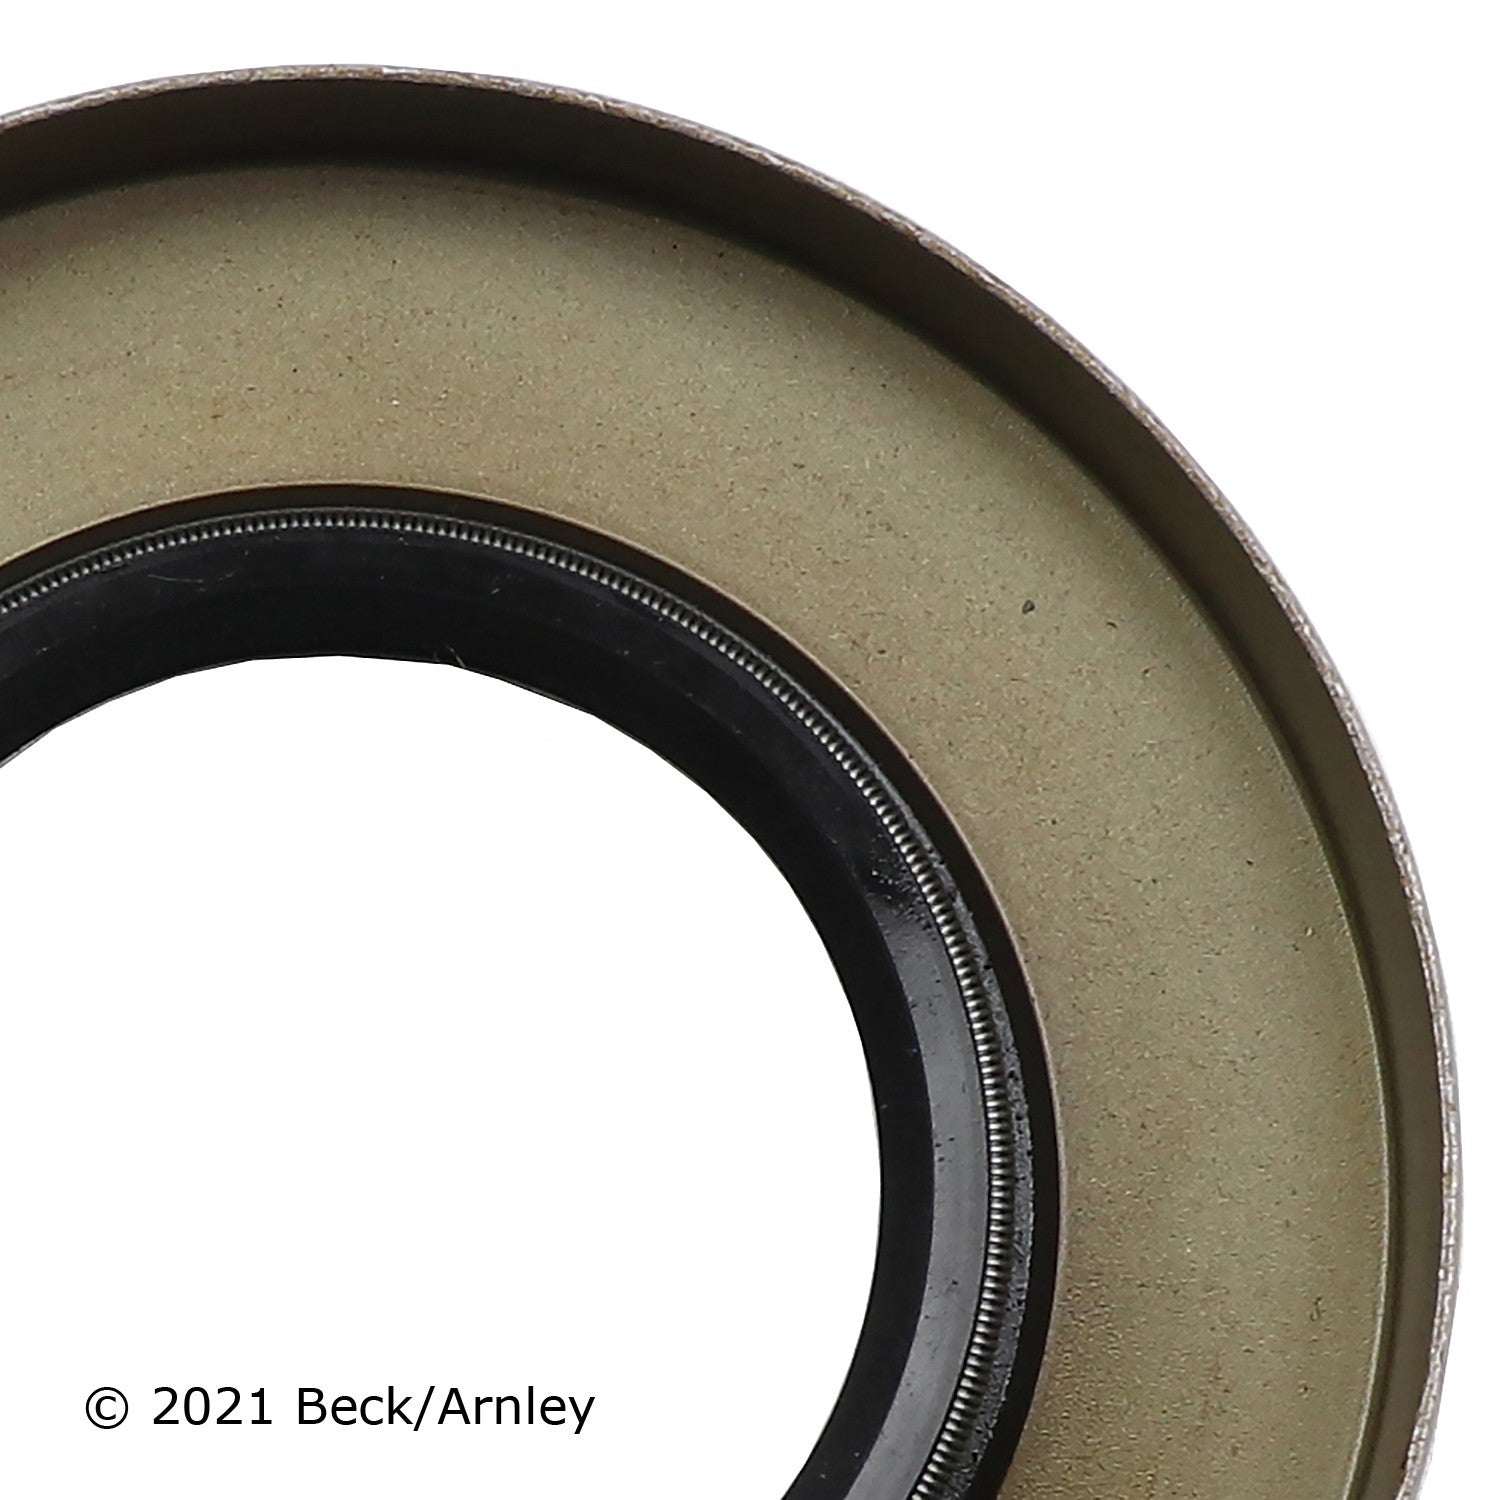 Beck Arnley 052-3136  Differential Pinion Seal for Lexus LX450 Toyota 4Runner Celica Cressida Land Cruiser Pickup